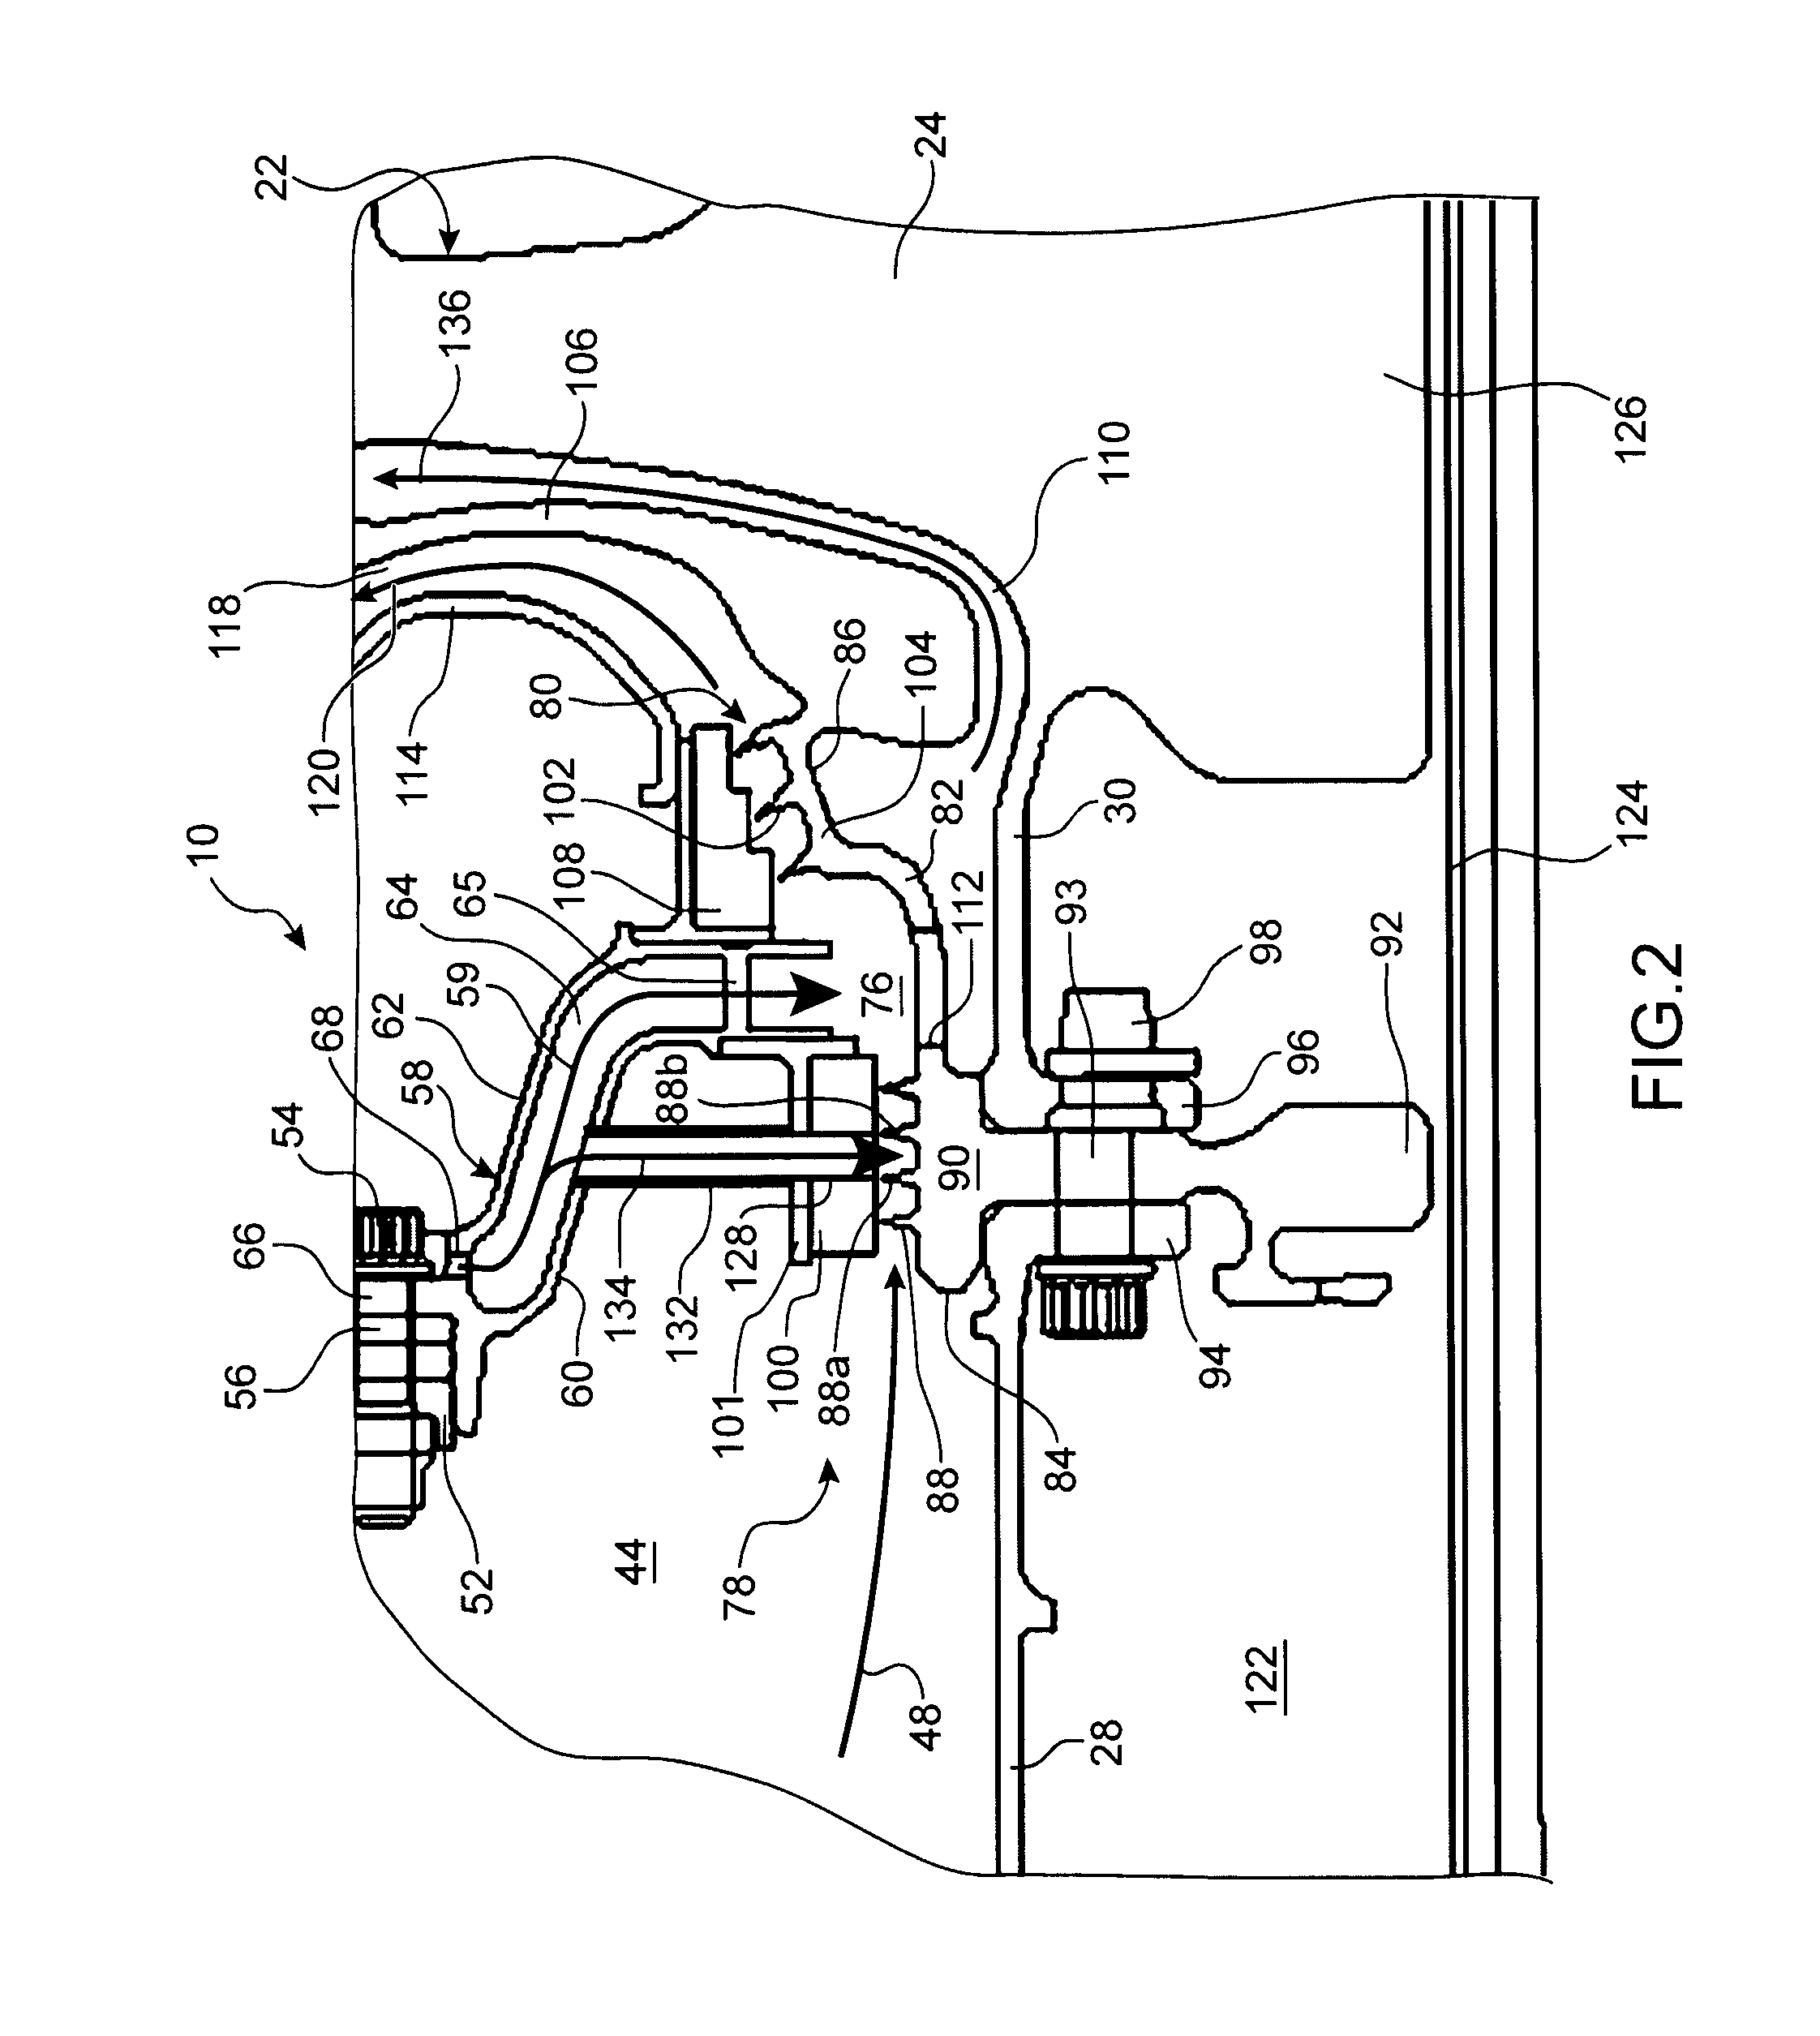 Turbine engine including an improved means for adjusting the flow rate of a cooling air flow sampled at the output of a high-pressure compressor